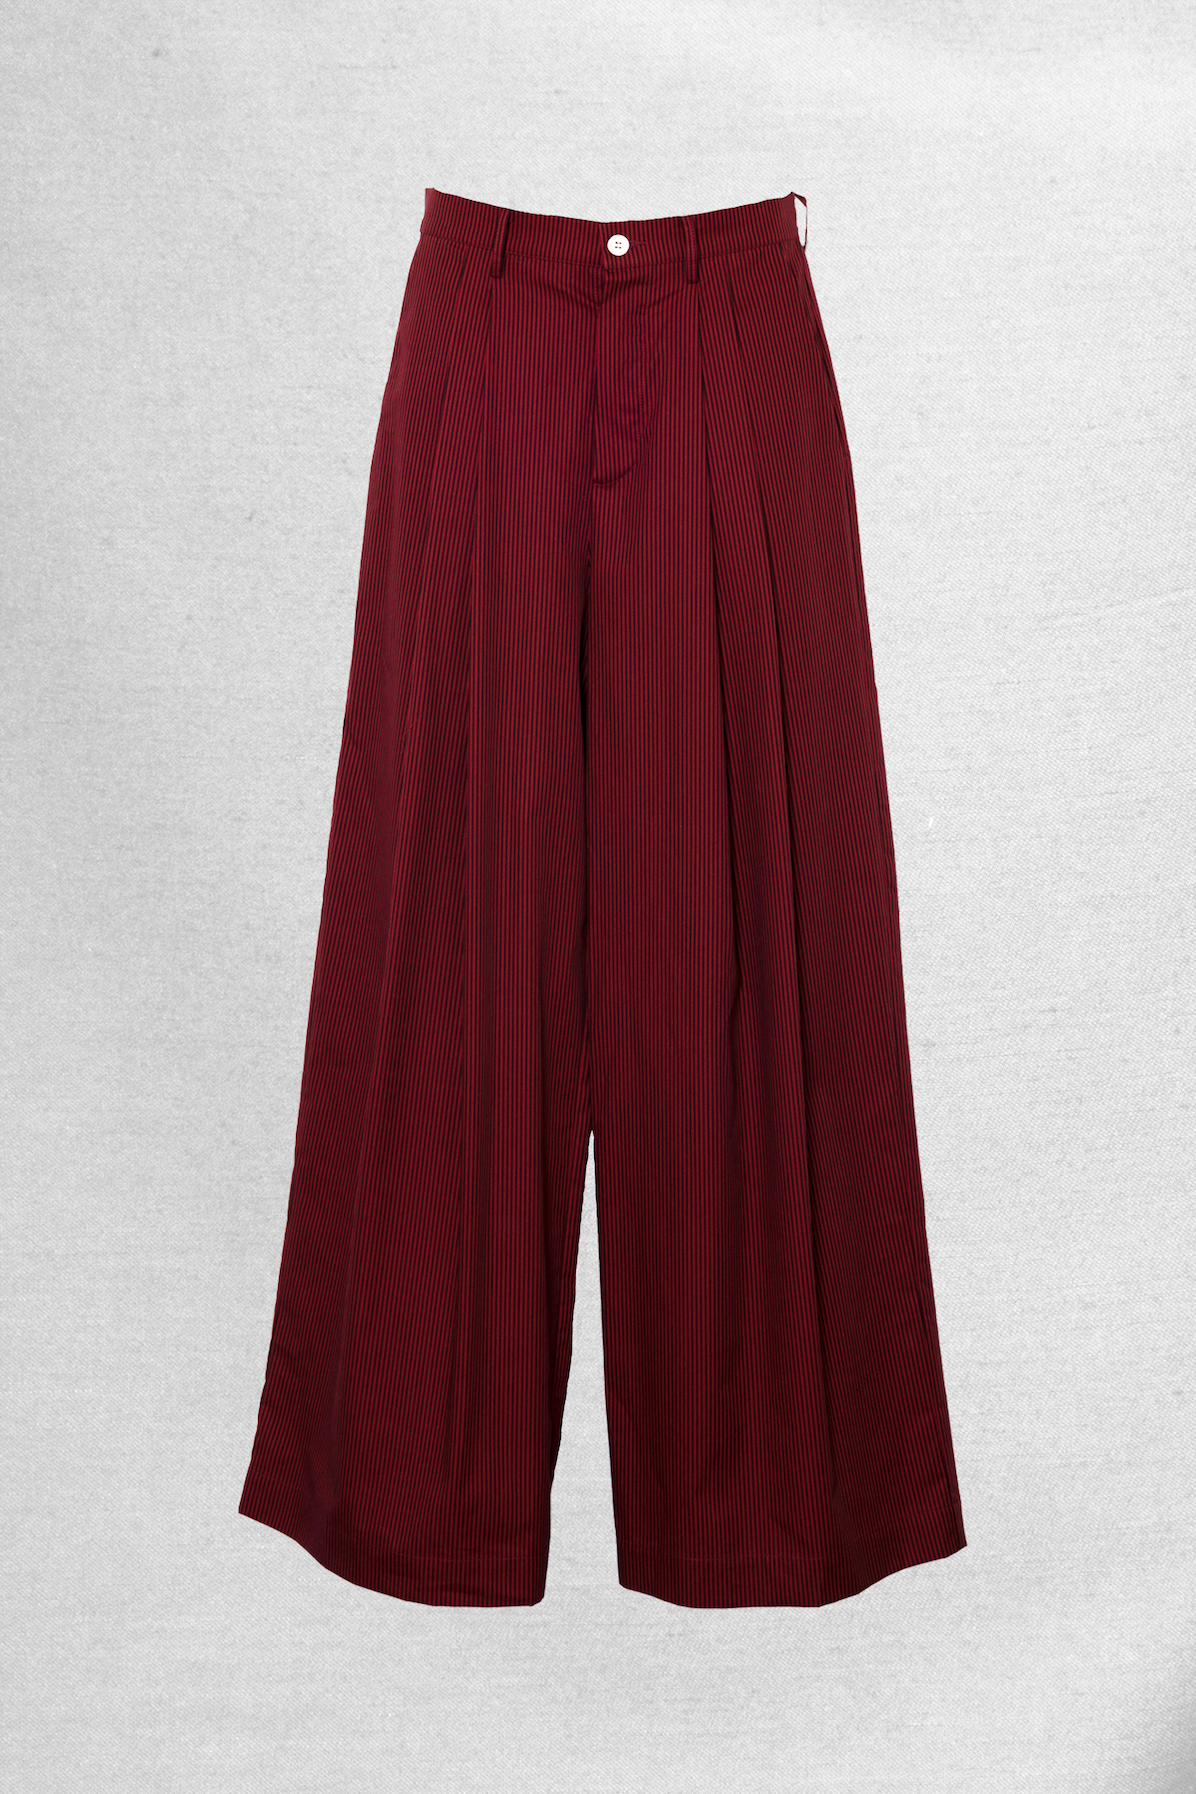 Archetype Billowing Trousers Berry Striped Cotton